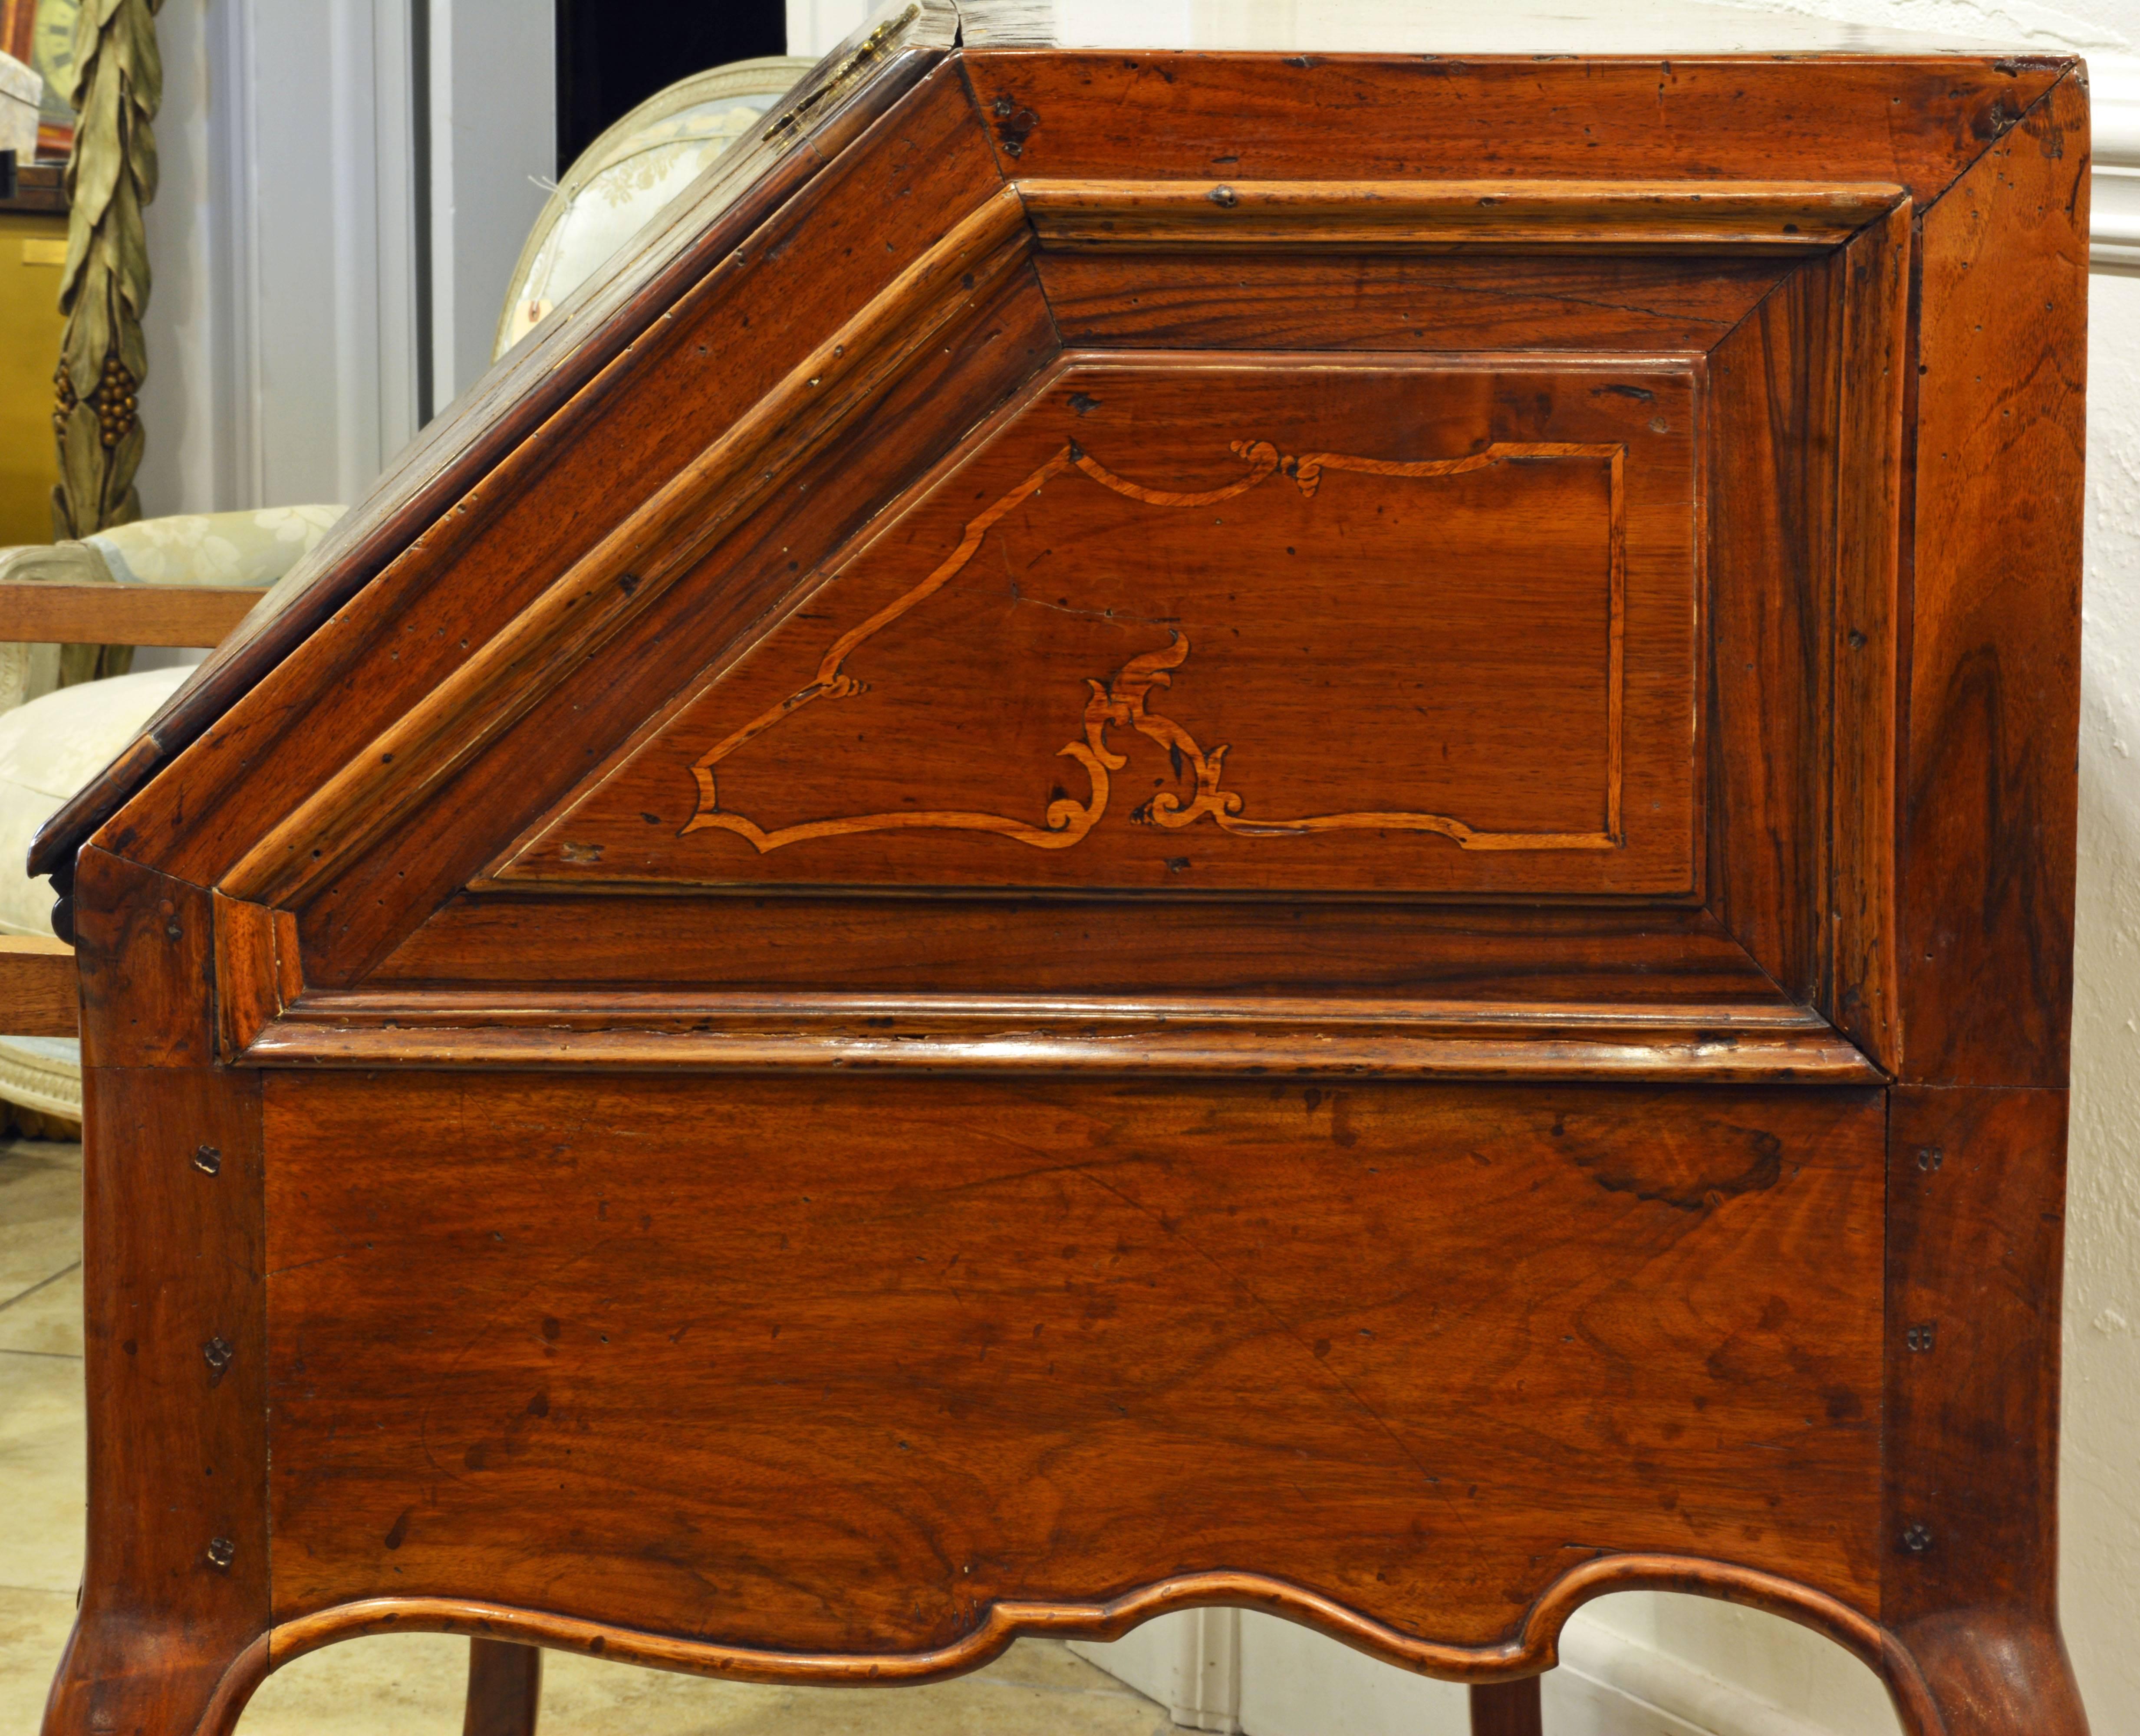 Charming 18th Century Italian Rococo Walnut and Fruitwood Inlaid Fall Front Desk 1